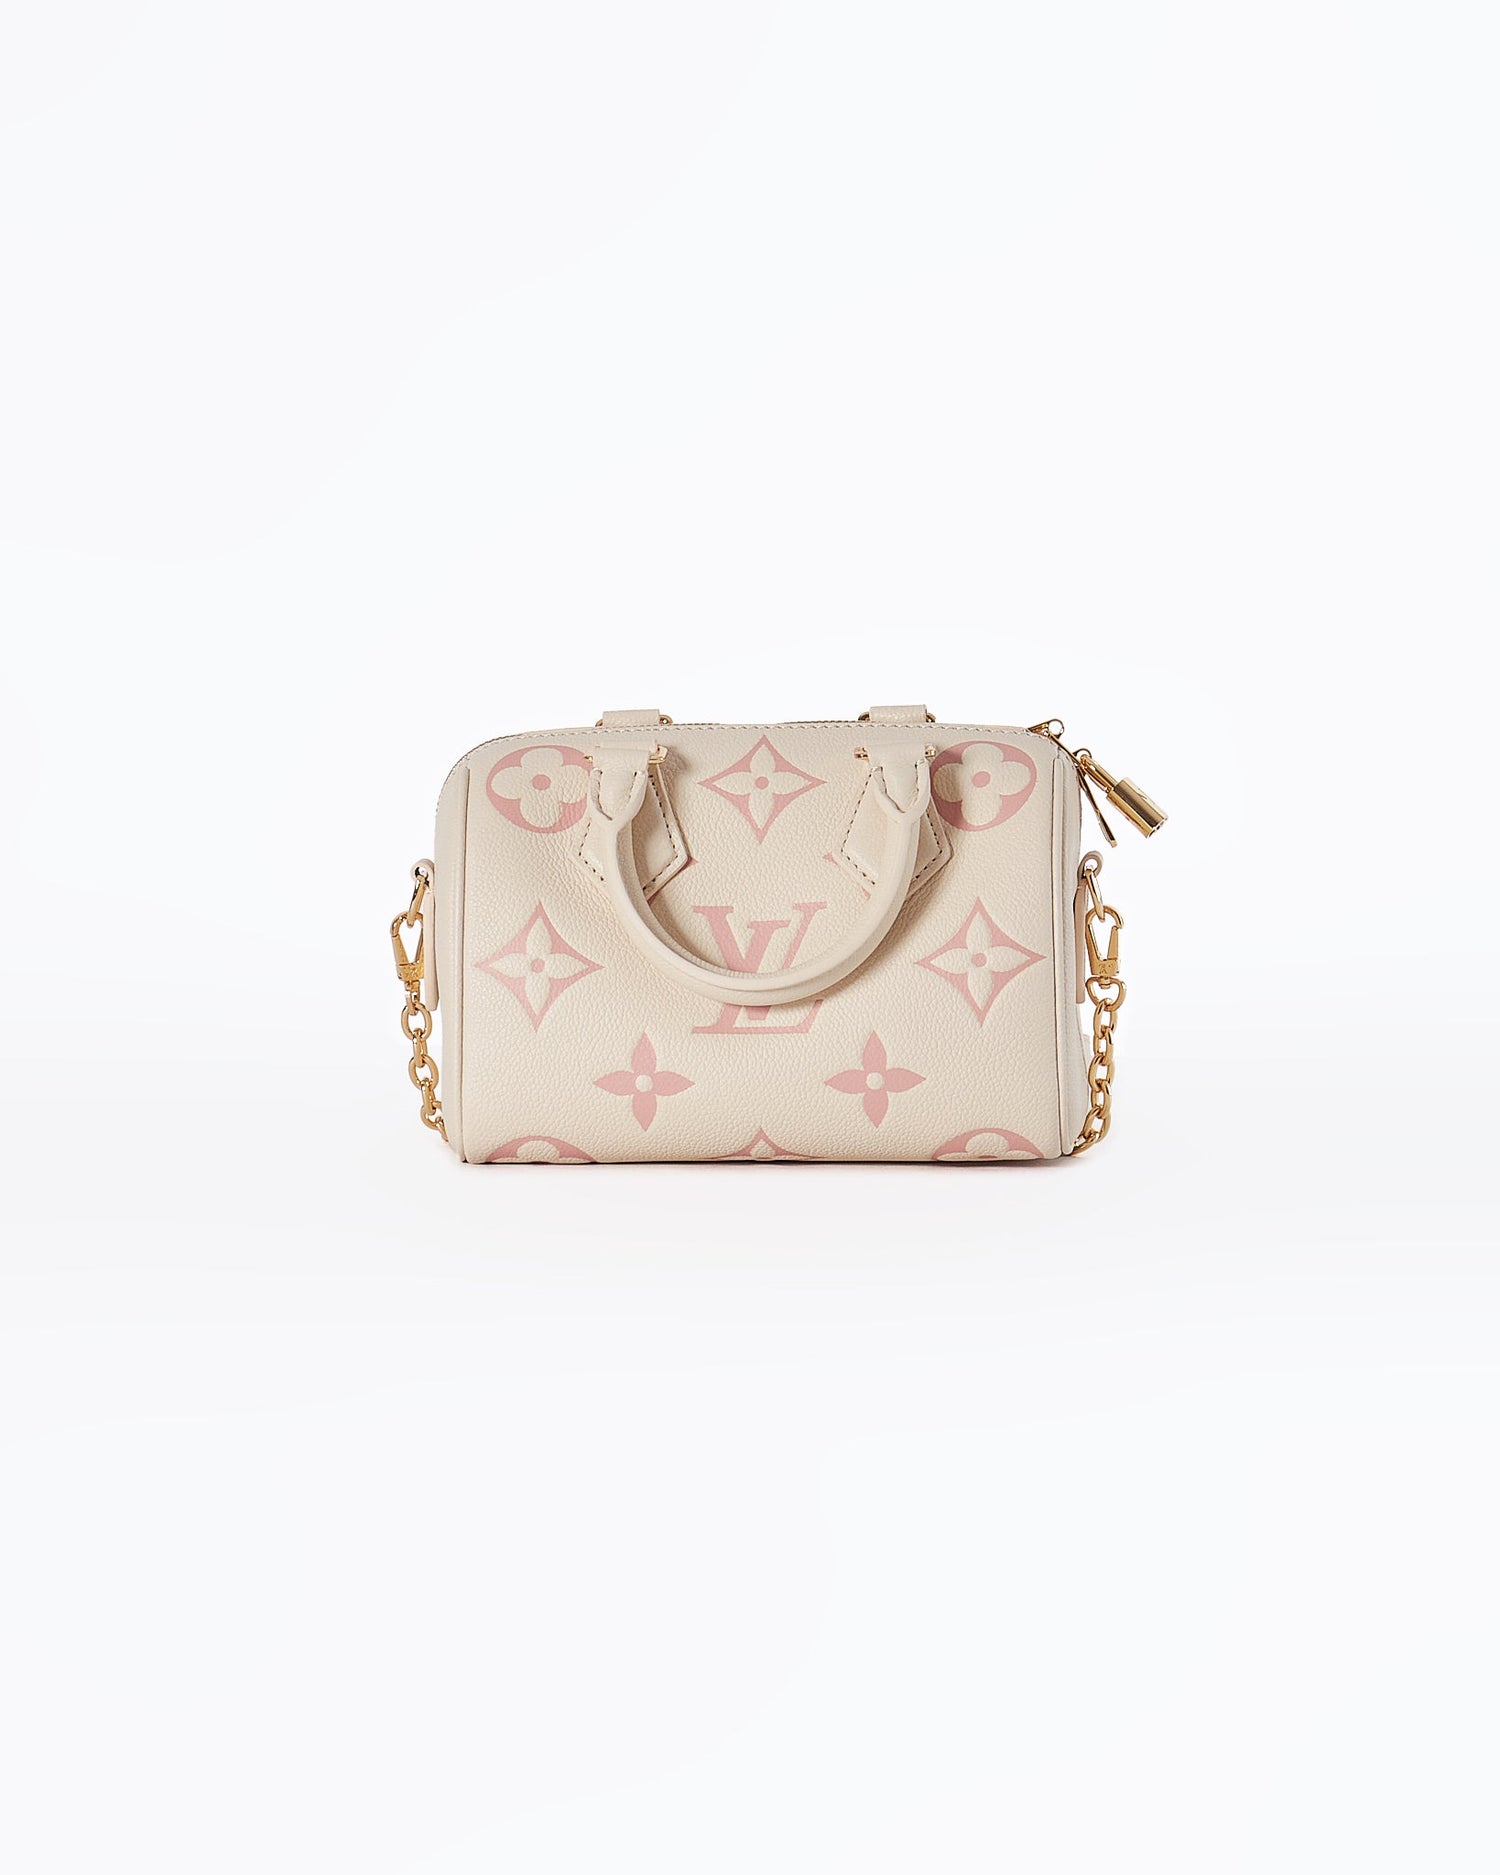 LV Cylinder Lady Bag 279 - MOI OUTFIT